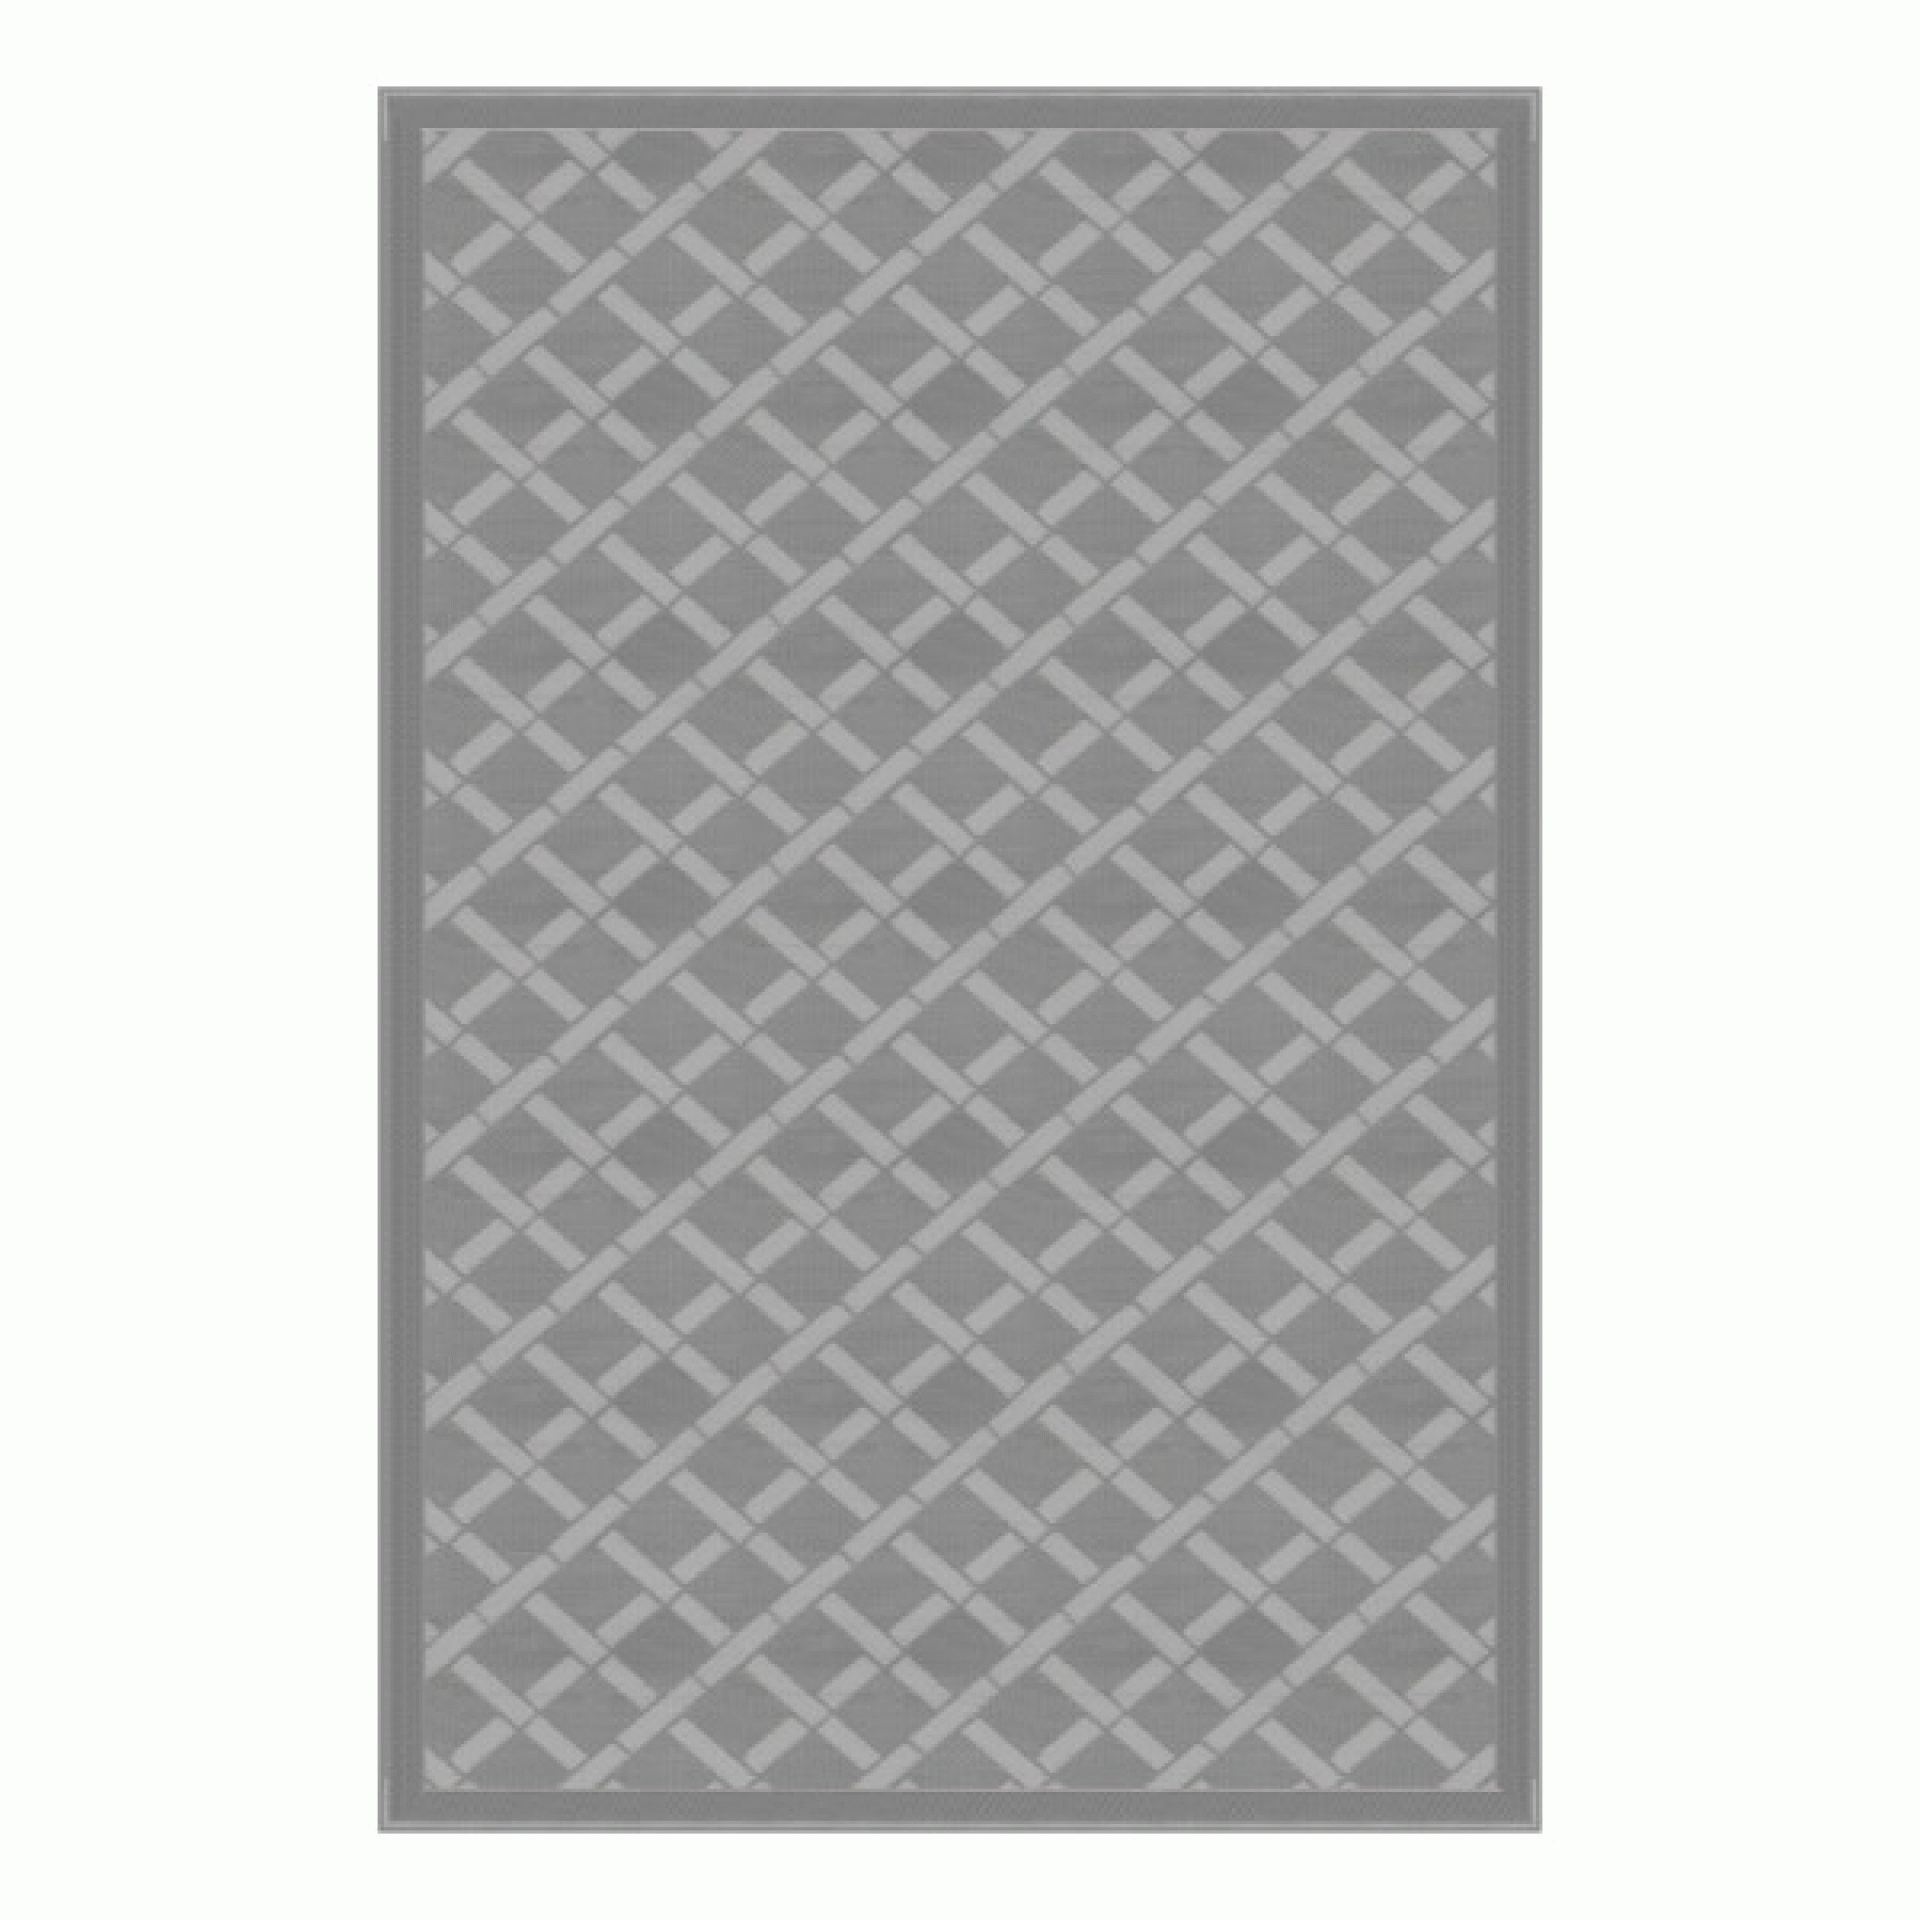 Lippert Components | 2021028010 | All Weather Patio Mat - 8' x 12' (Gray)